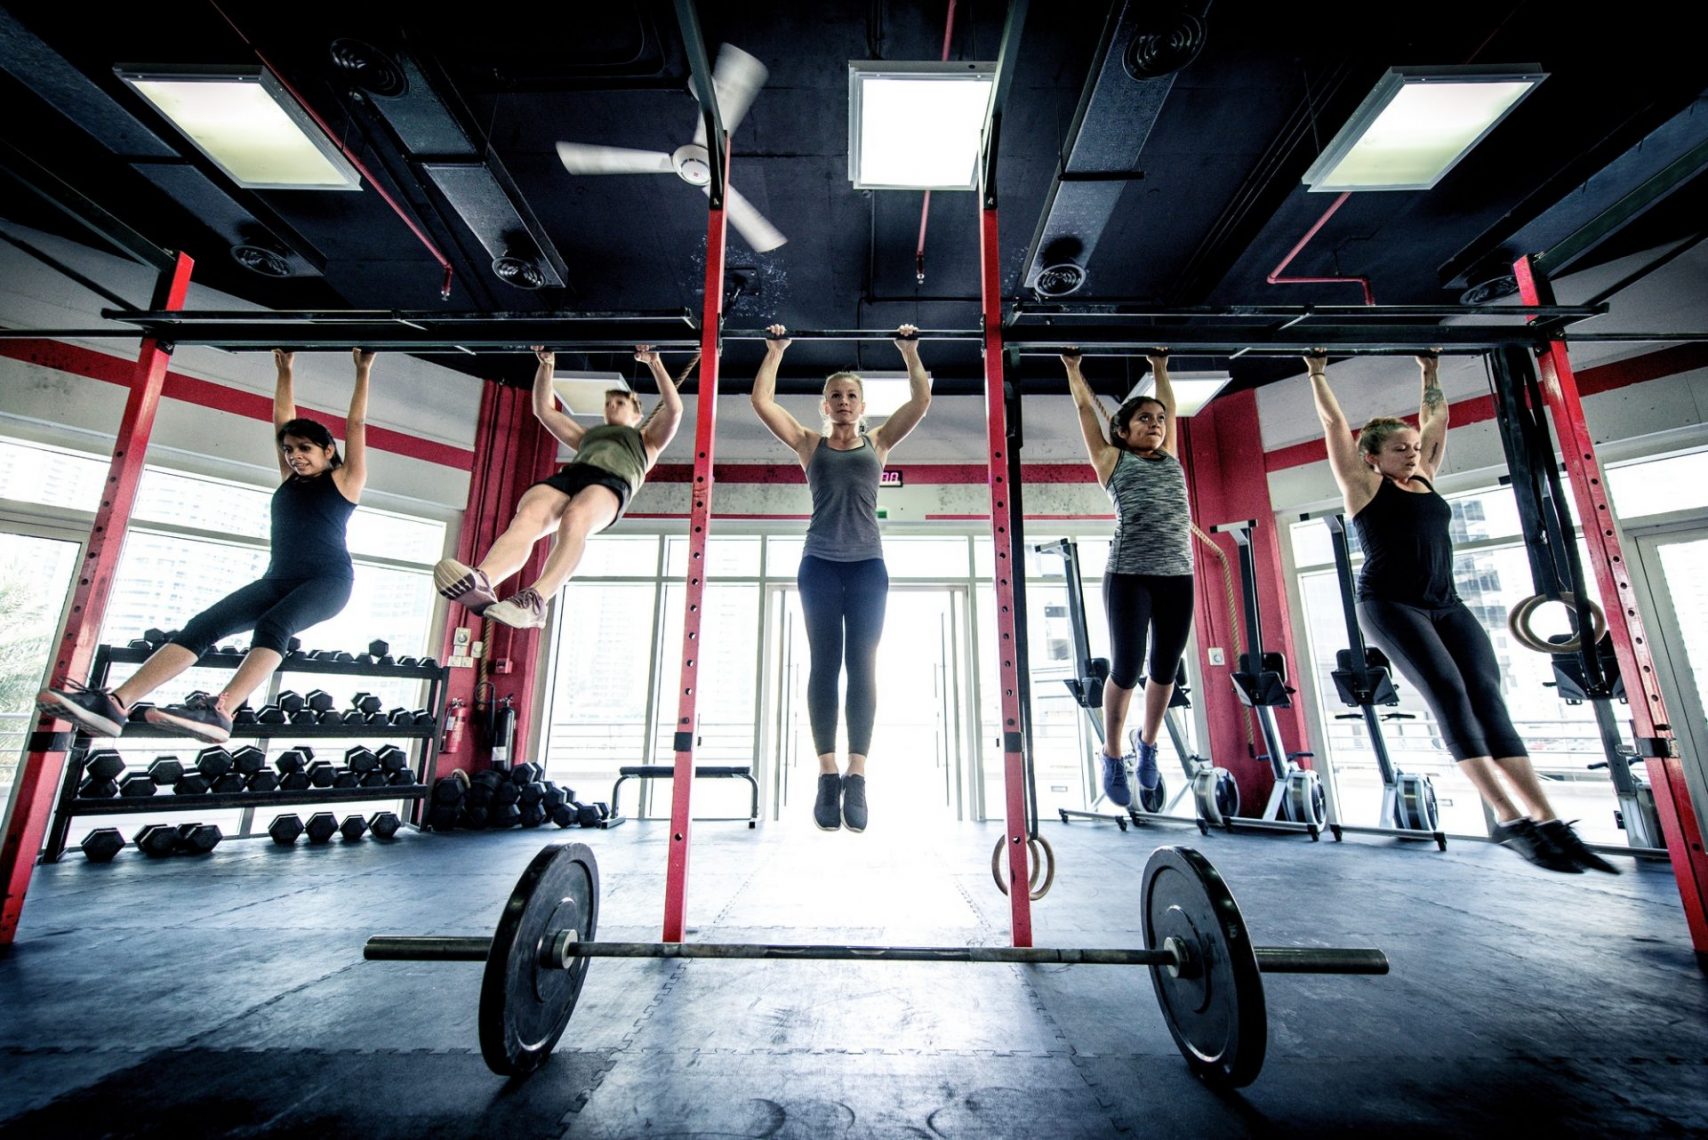 Athletes training in a cross-fit gym